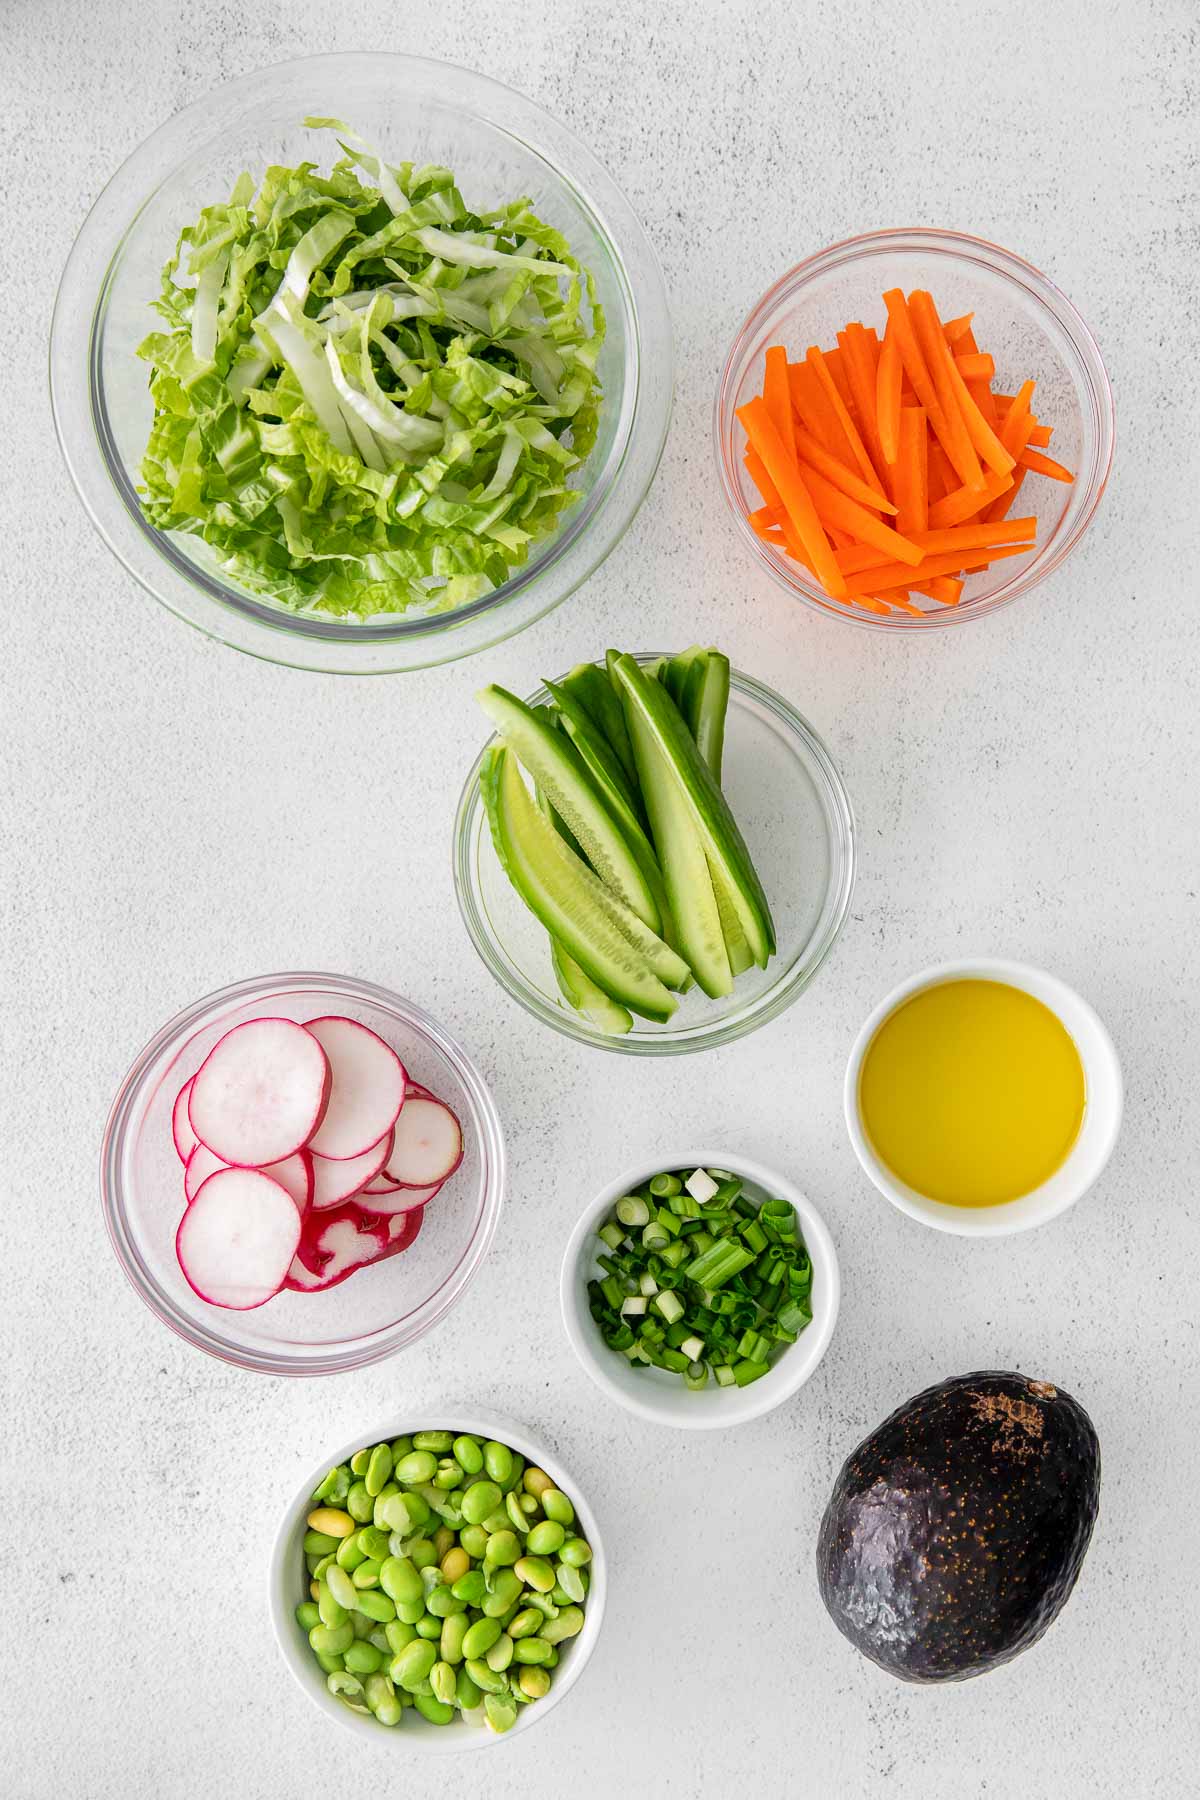 several small glass bowls of edamame, sliced radishes, sliced green onions, cabbage, sliced carrots and a whole avocado.